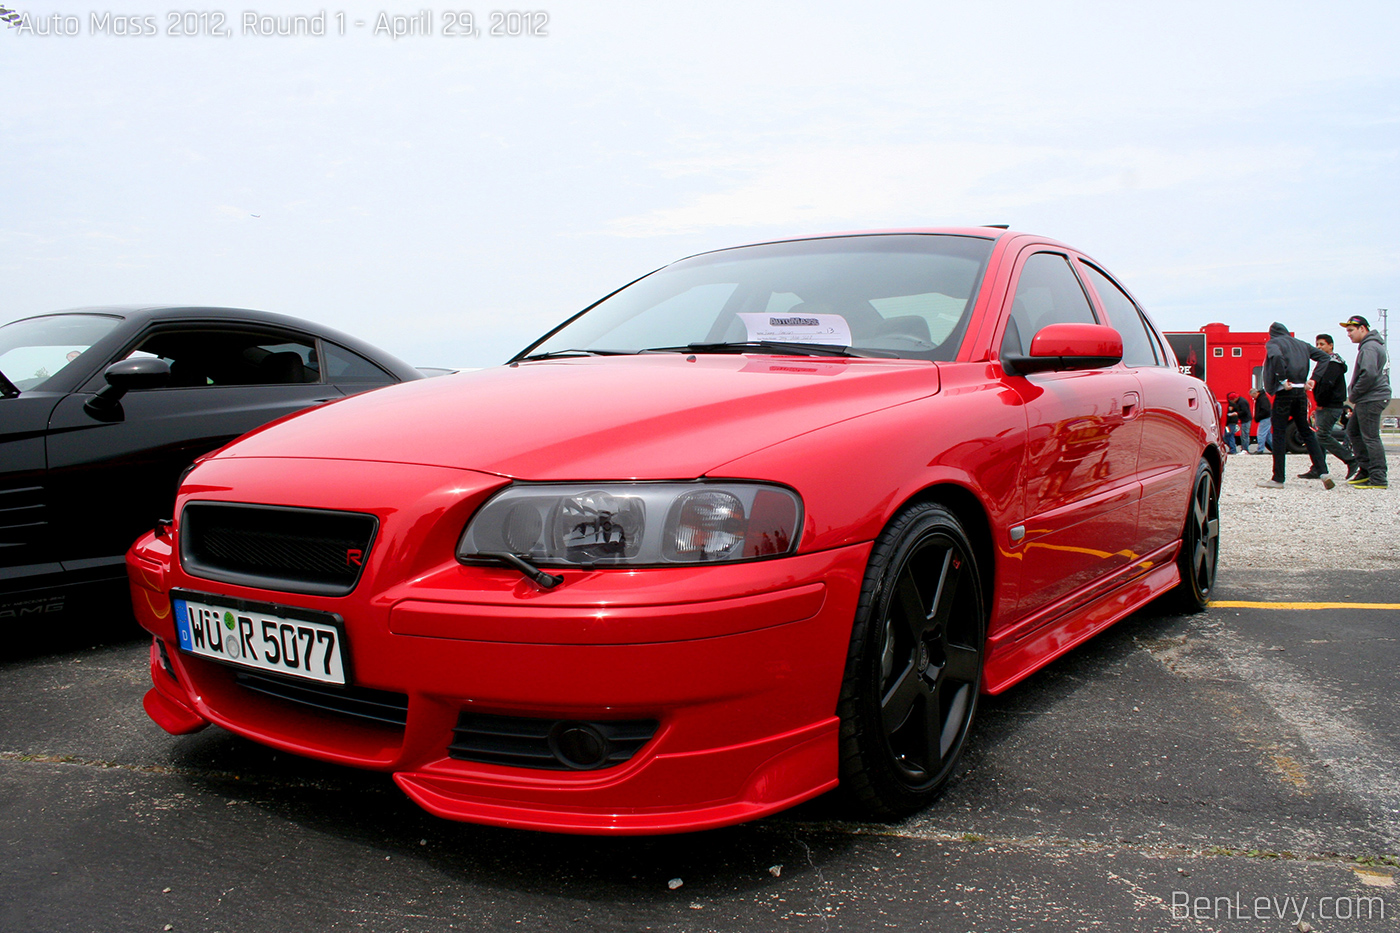 Red Volvo S60 R